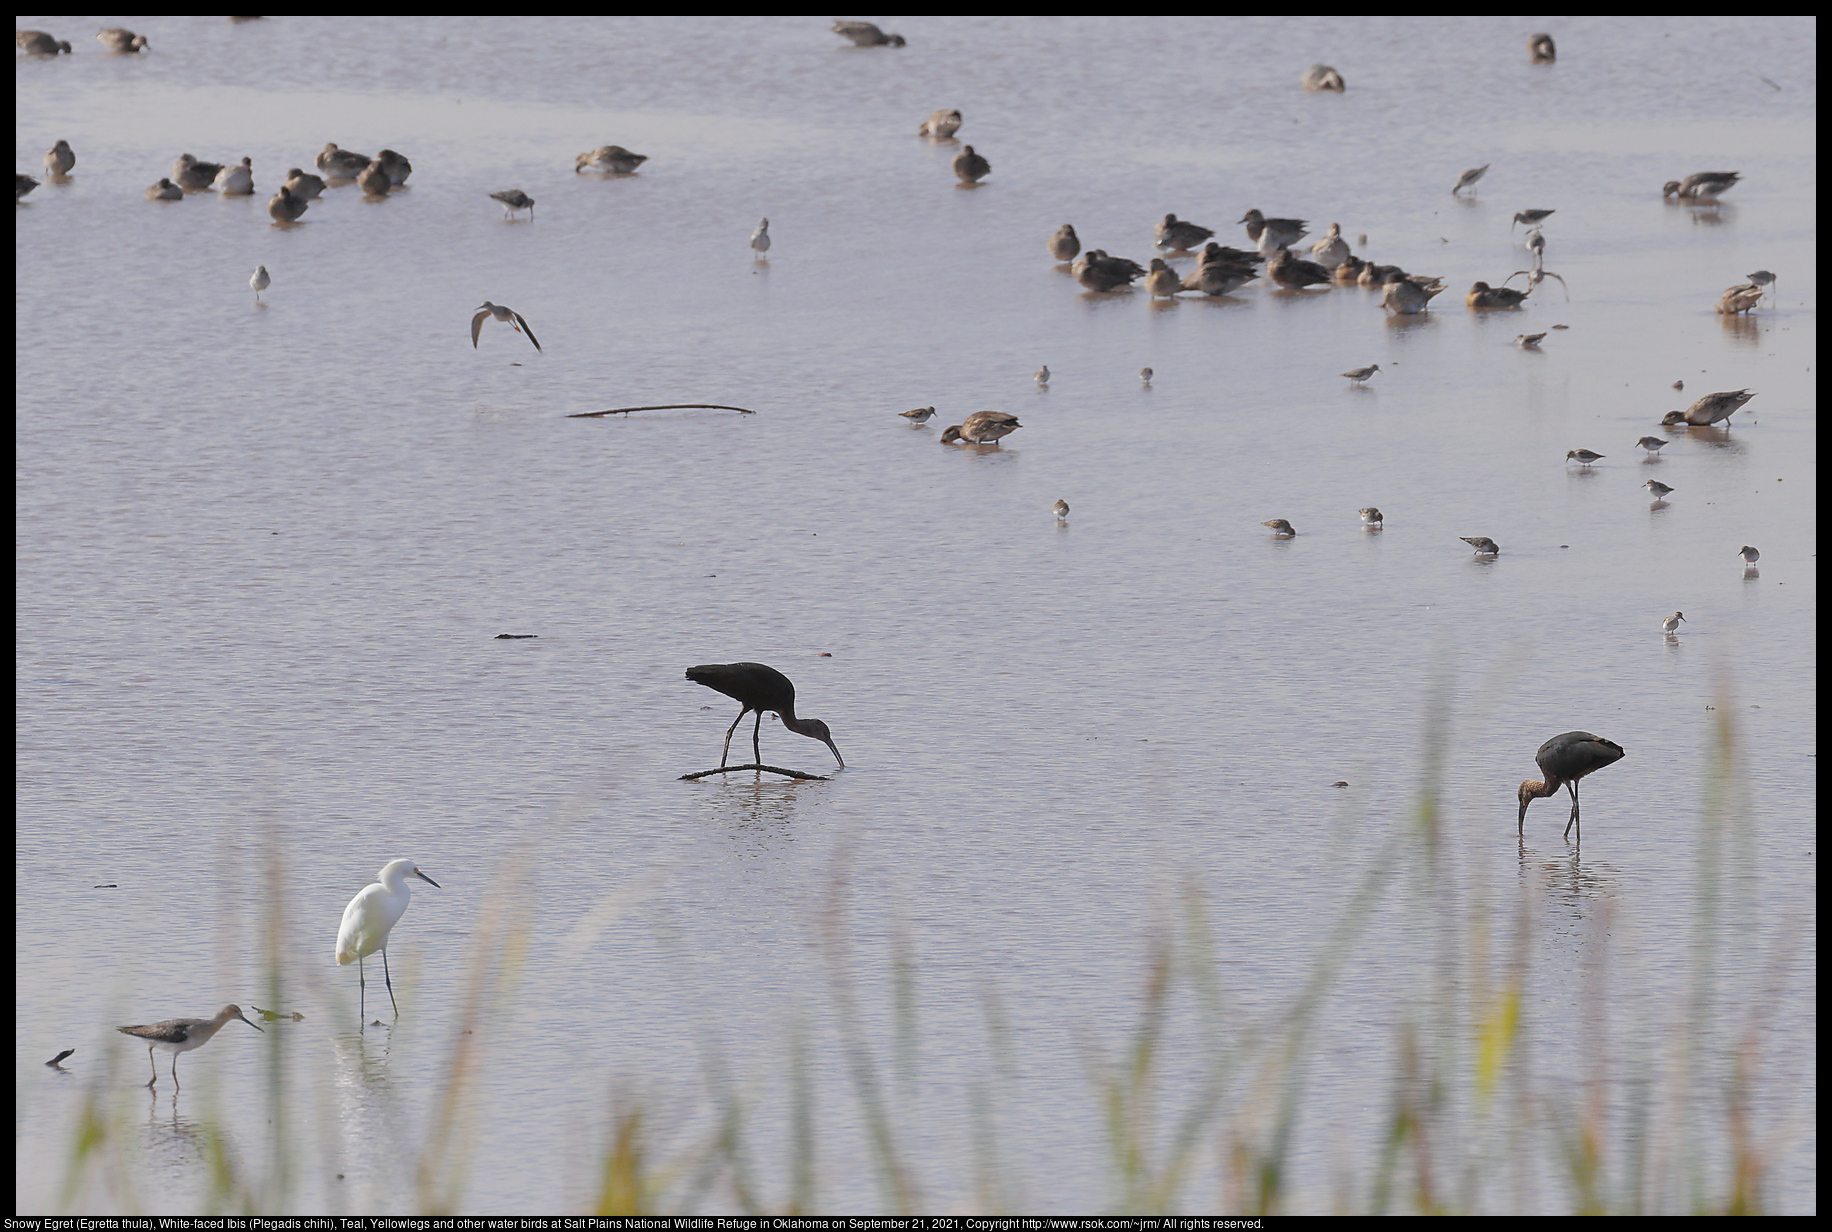 Snowy Egret (Egretta thula), White-faced Ibis (Plegadis chihi), Teal, Yellowlegs and other water birds at Salt Plains National Wildlife Refuge in Oklahoma on September 21, 2021